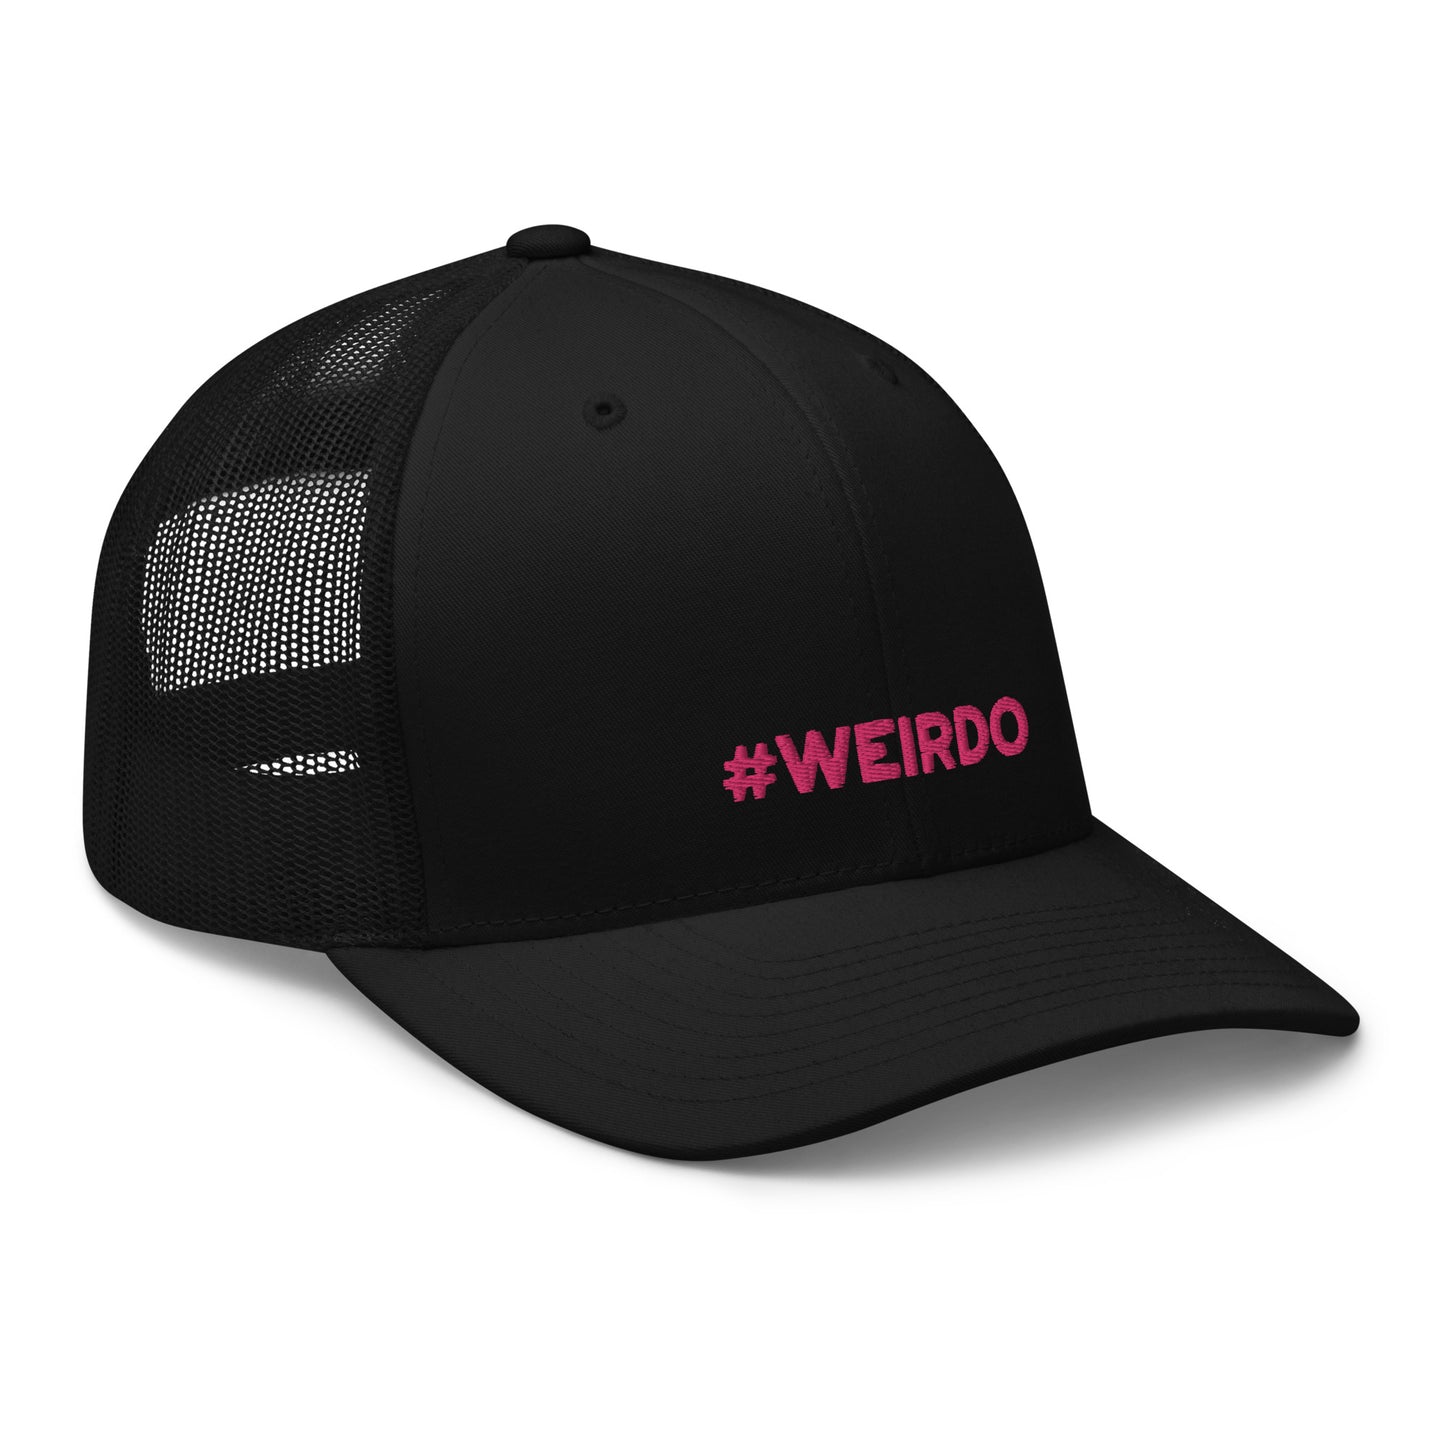 #WEIRDO | This black truckers cap with mesh has the #WEIRDO meme embroidered in the color pink at the front of the cap. If you are looking for weird gifts like funny hats for adults who are weird, hashtagweirdo is the store for you!